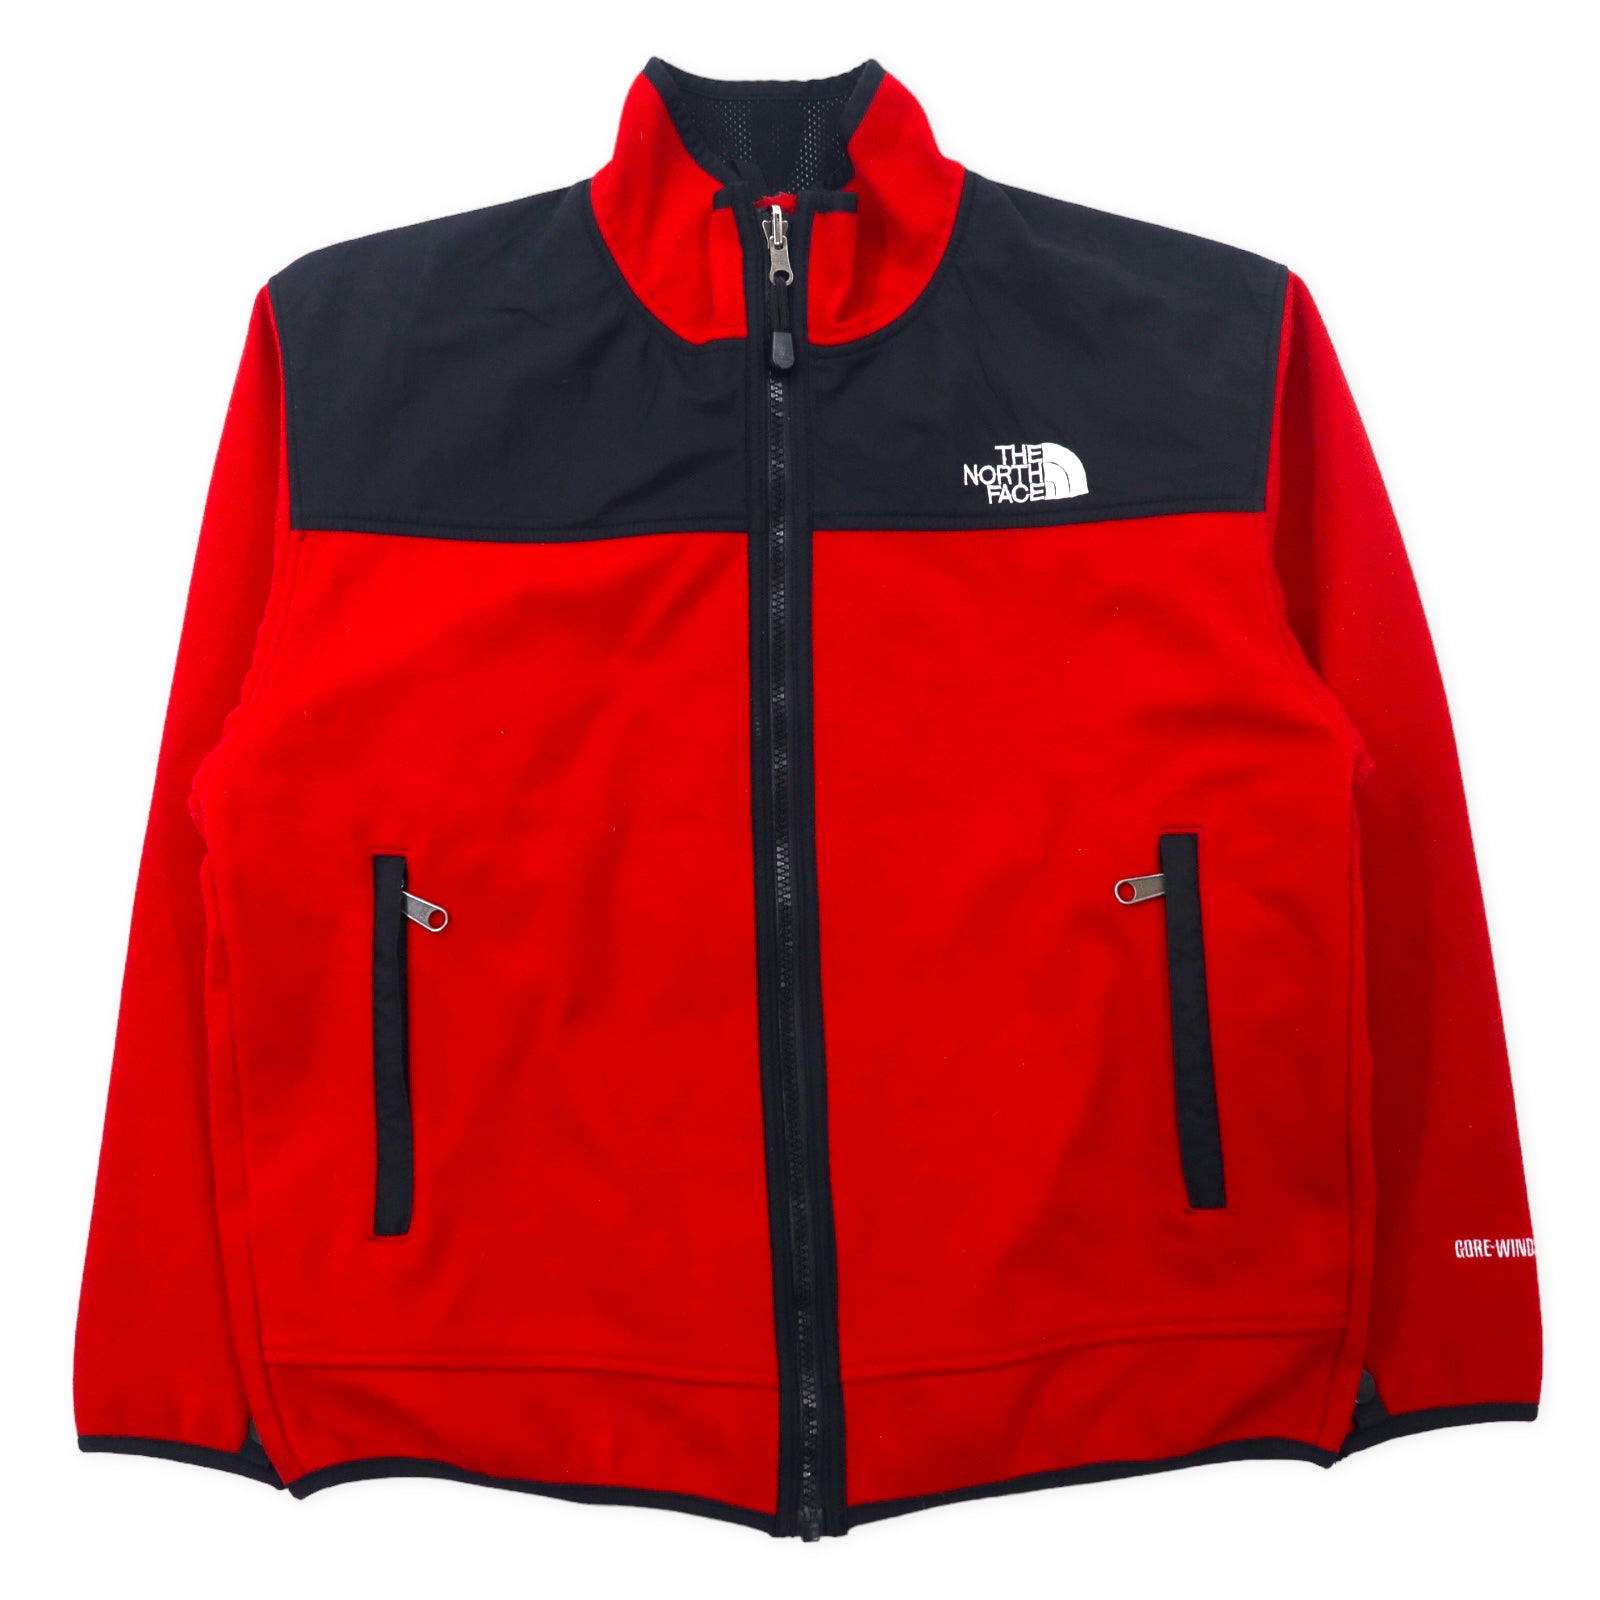 THE NORTH FACE 90's FLEECE Jacket S Red Black Goo Rind 